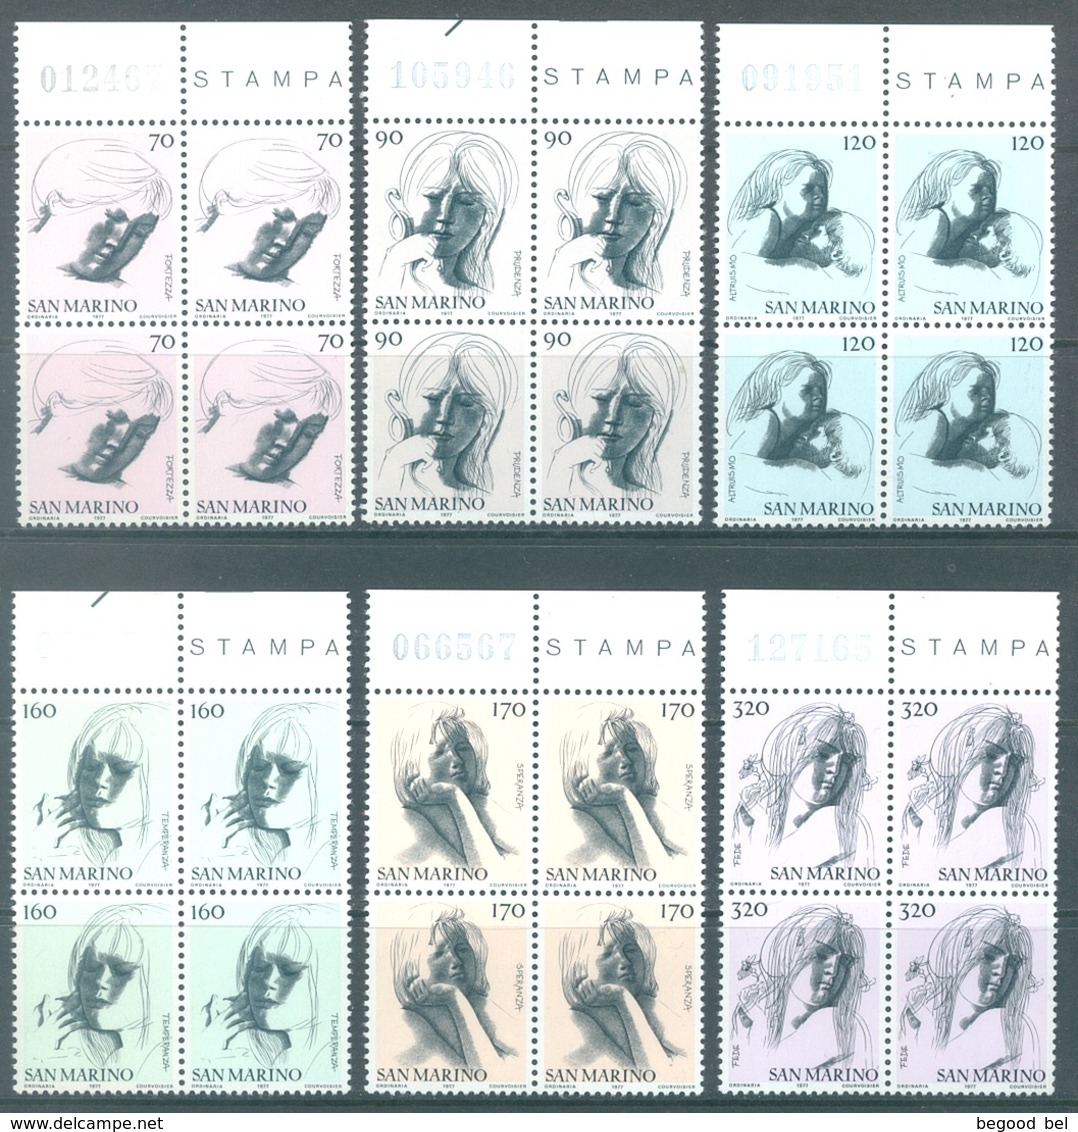 SAN MARINO - 1976-1980 - MNH/** BLOC OF 4  - LOT -  Sa S.186 S.191 S.208 S.209  - Lot 19931 - VALUE 29 EUR - Collections, Lots & Séries